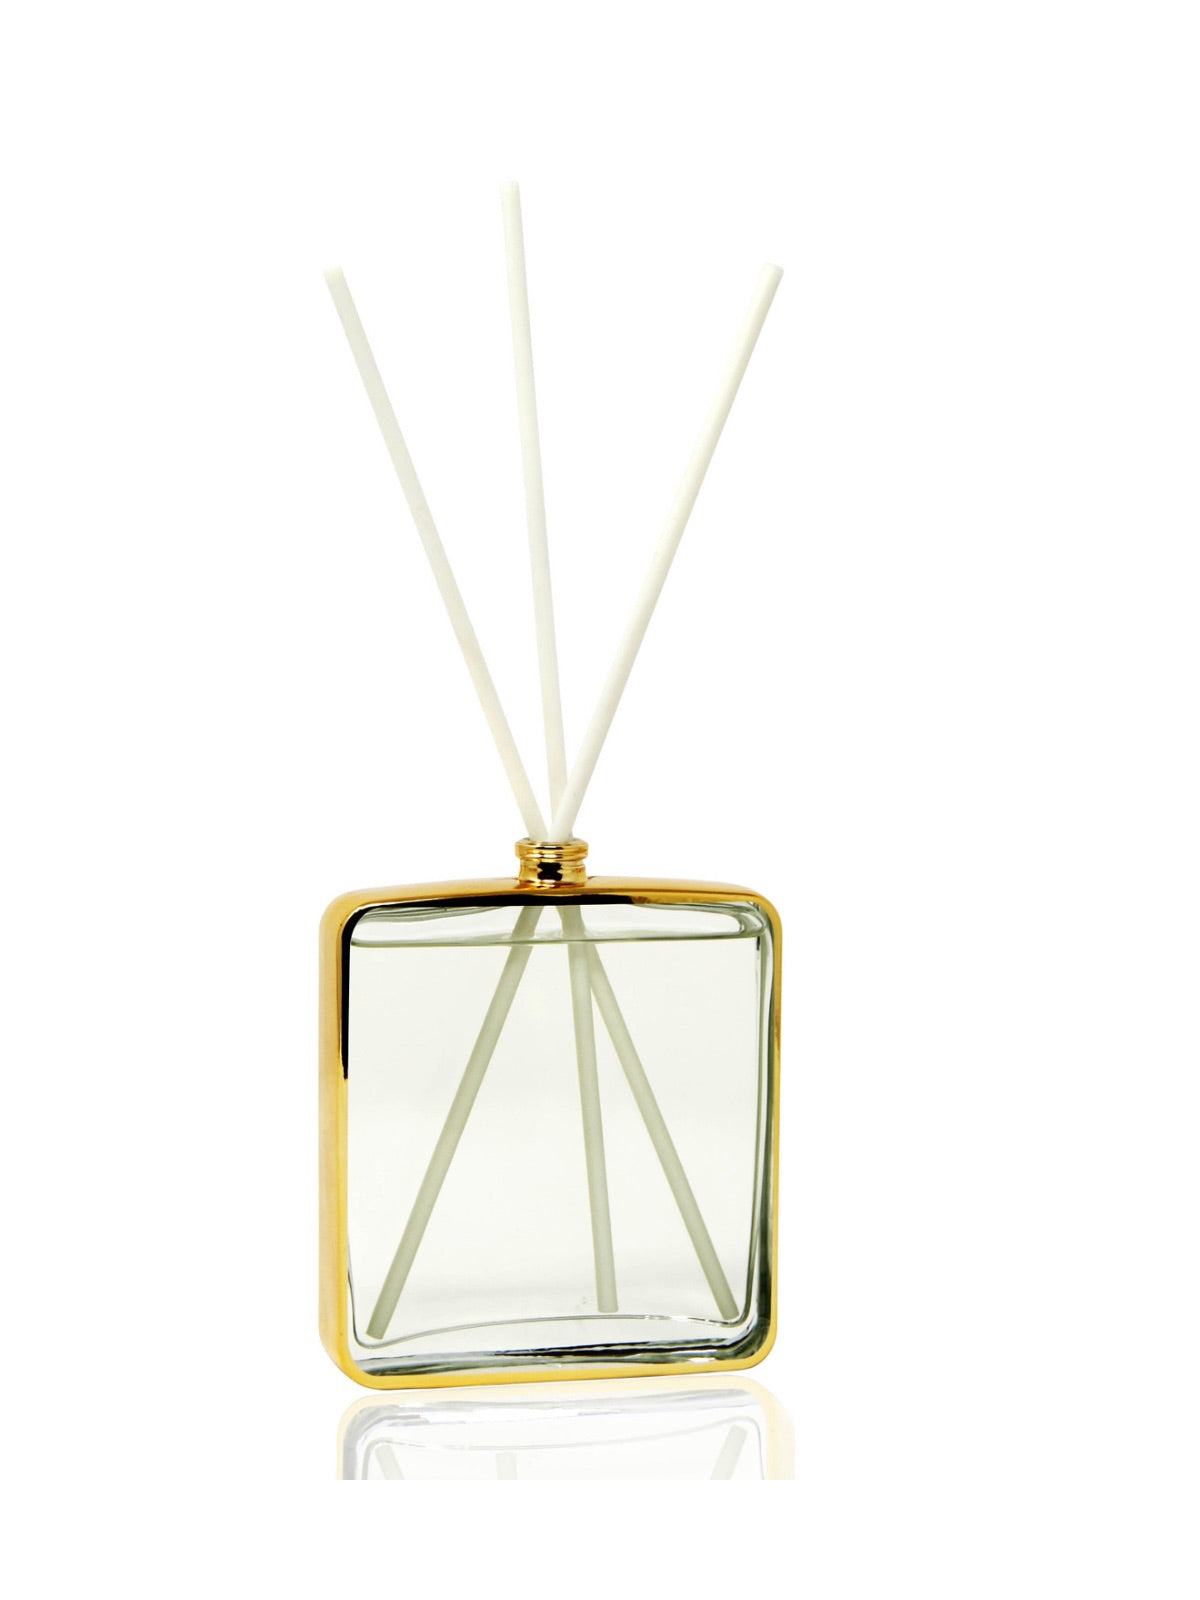 100ml Glass Reed Diffuser with Gold Square Frame with Luxury Zen Tea Scent sold by KYA Home Decor.